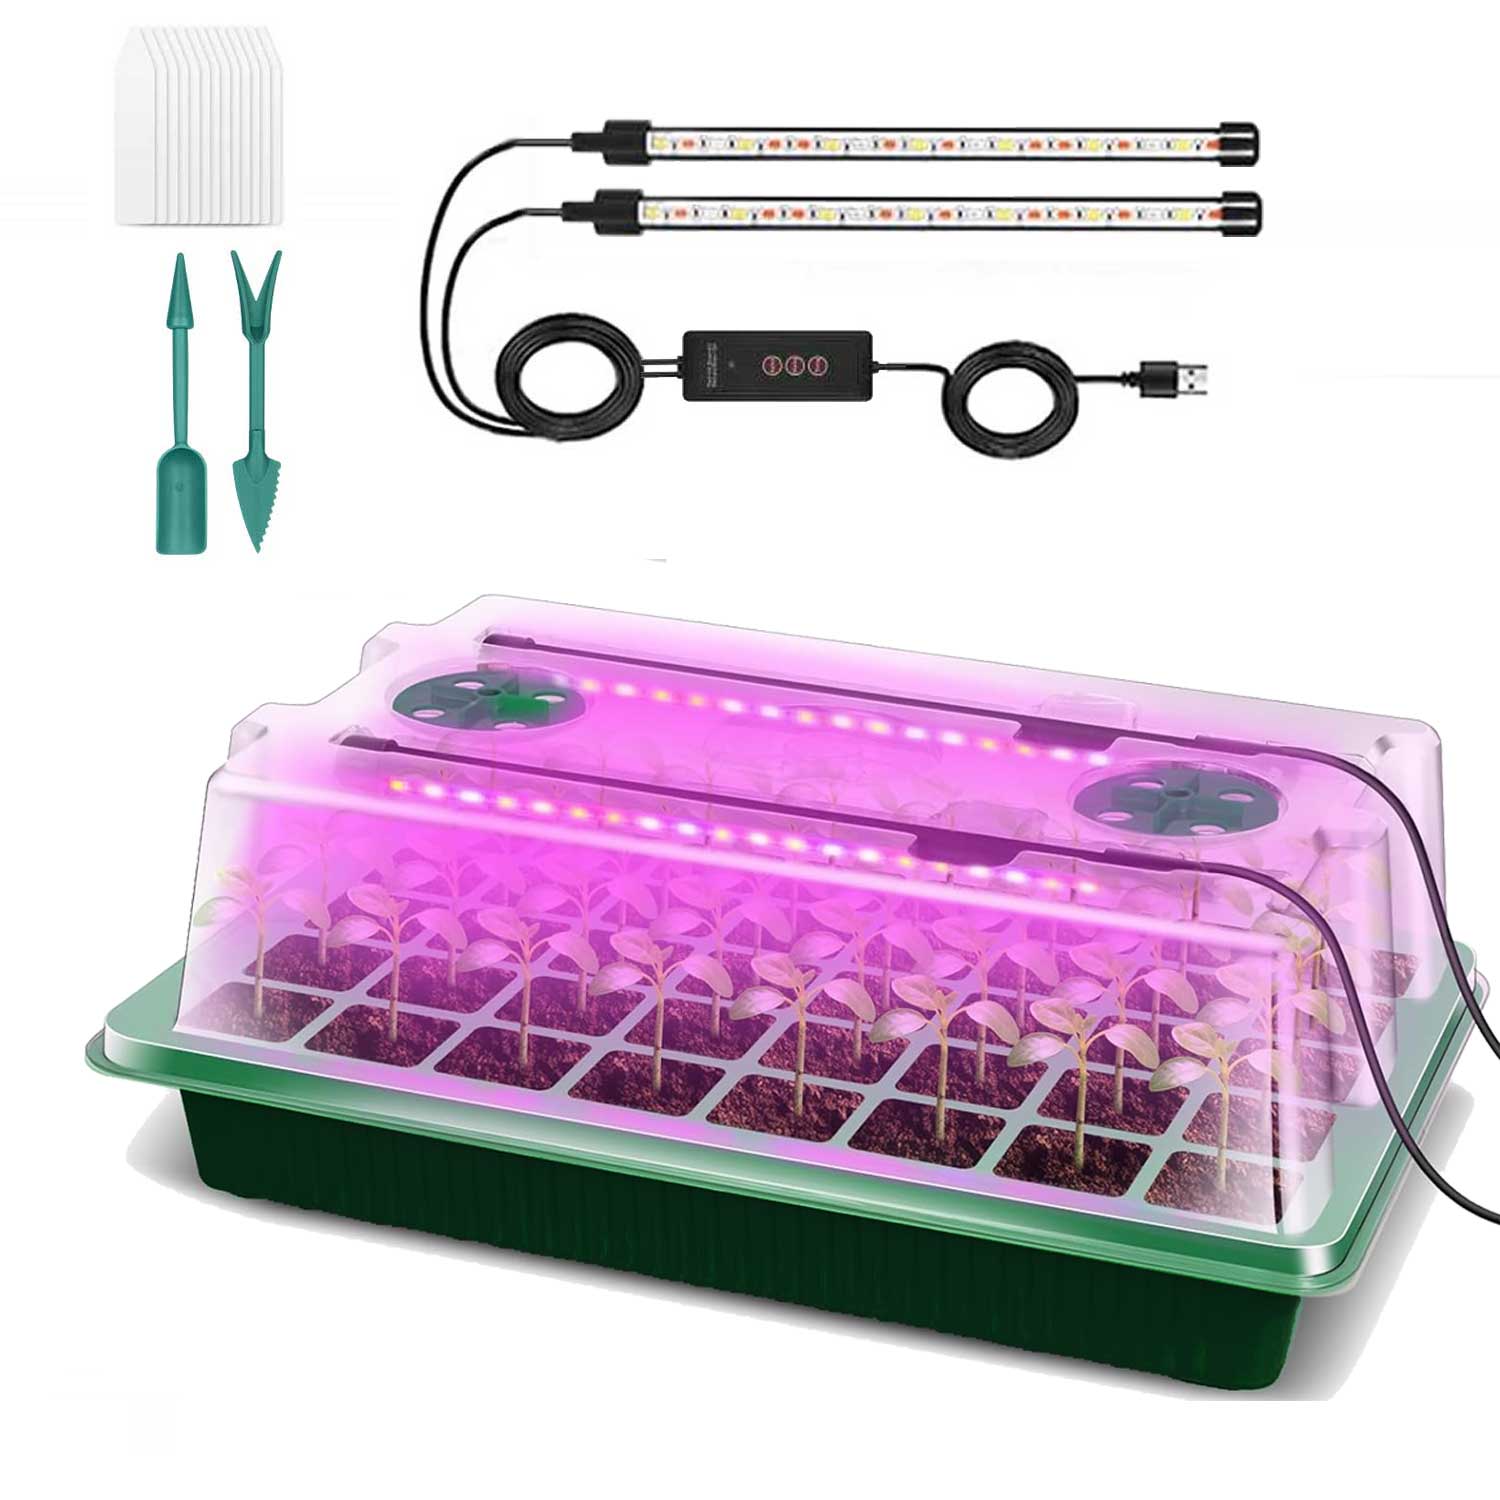 1 Packs Seed Starter Tray with Grow Light High Dome Seed Germination Kit 40 Cells with 2 LED Grow Lights Seedling Starter Kit with Smart Timer Red&lue and Yellow Fullspectrum Growth Light